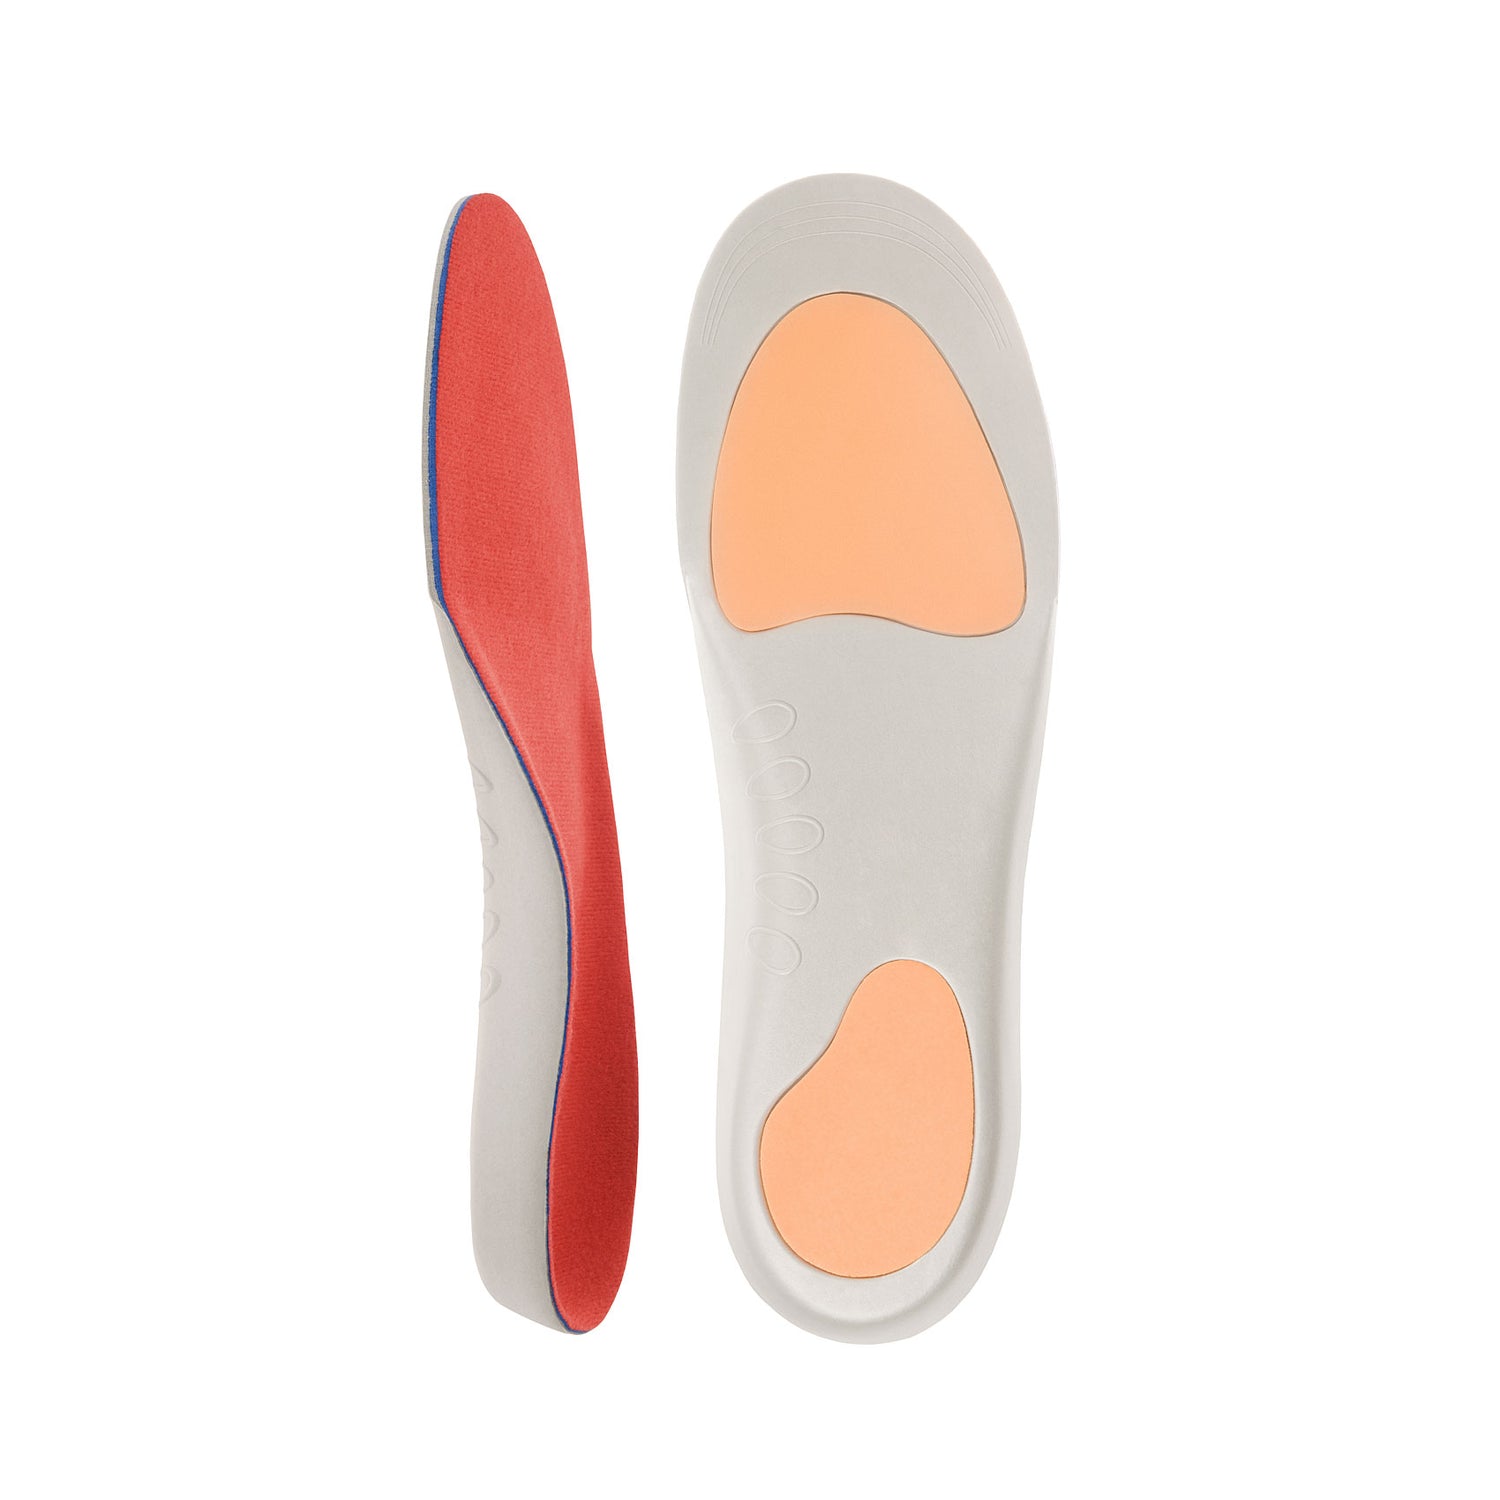 DJMed Orthotic - Shoe Insoles - Mens 5.5-7